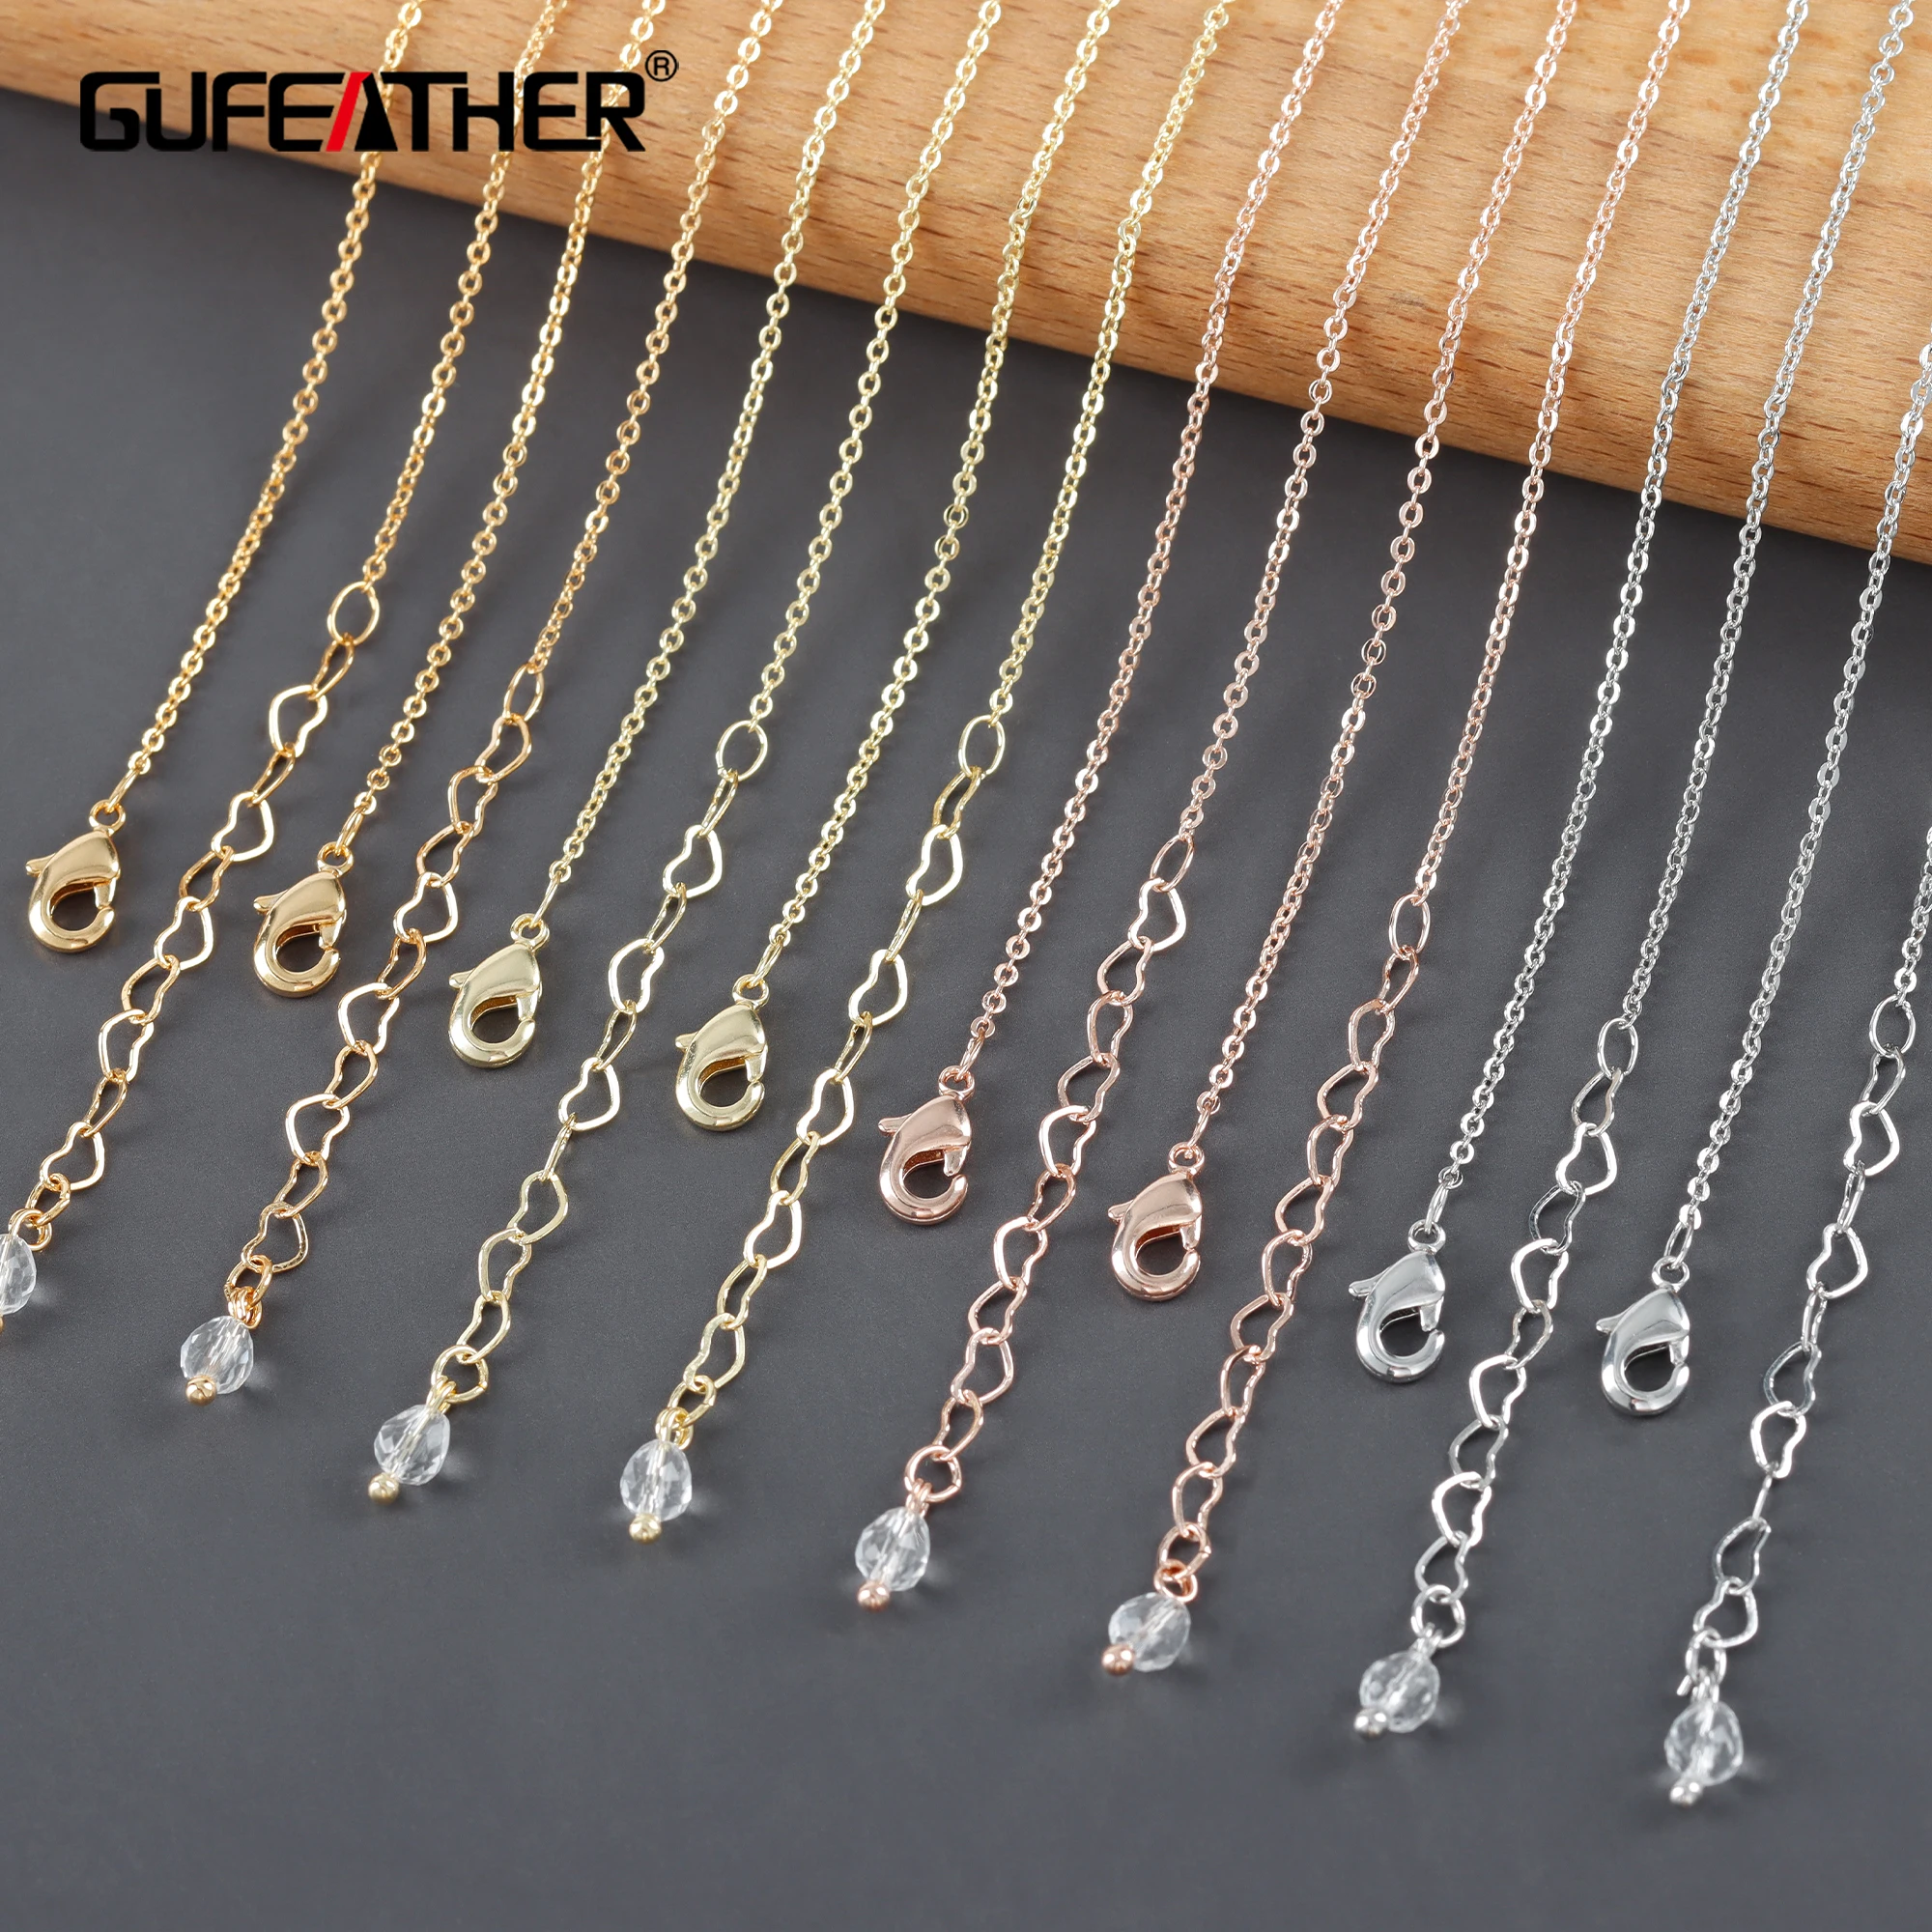 

GUFEATHER M1094,diy chain with lobster clasps,necklace for women,18k gold plated,copper,fashion chain,necklace jewelry,6pcs/lot